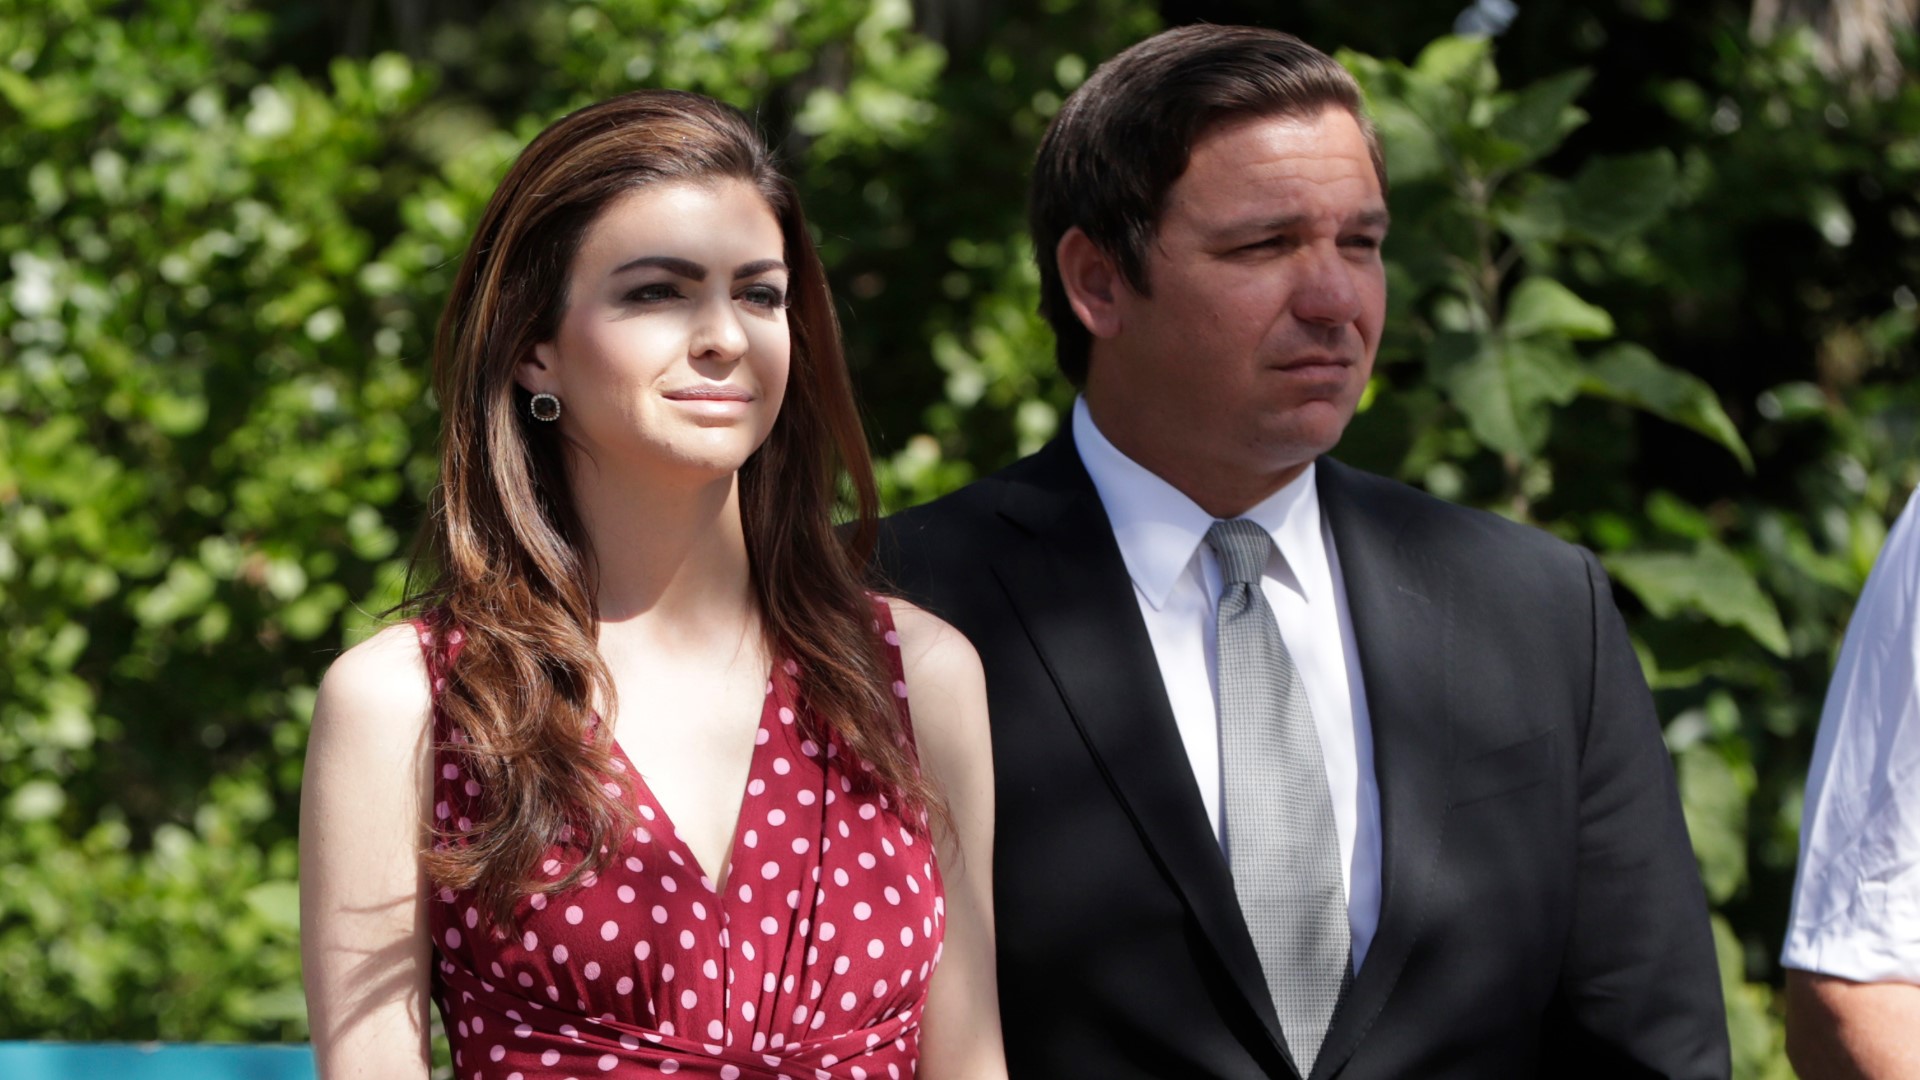 Florida's First Lady Casey DeSantis will be at First Coast High School at 11 a.m. alongside the Commissioner of Education and the Secretary of the Agency for Healthcare Administration.